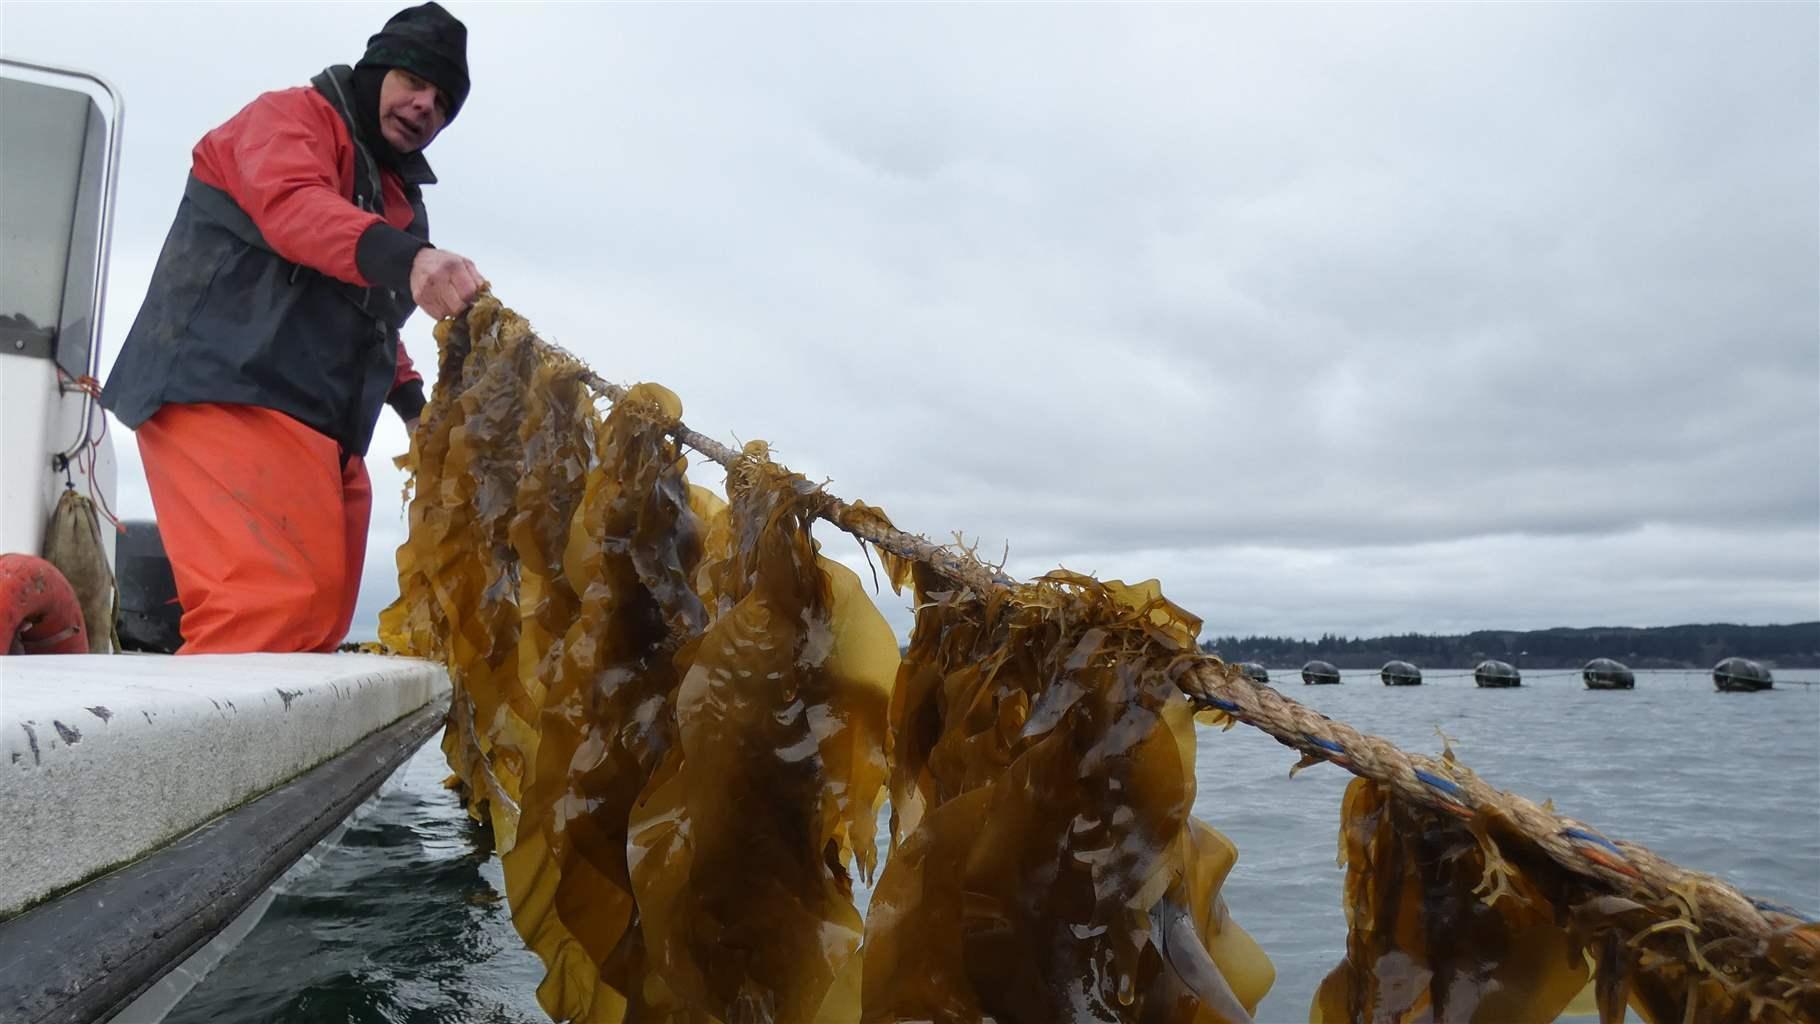 WA seaweed farming could boom but permitting remains difficult - Crosscut